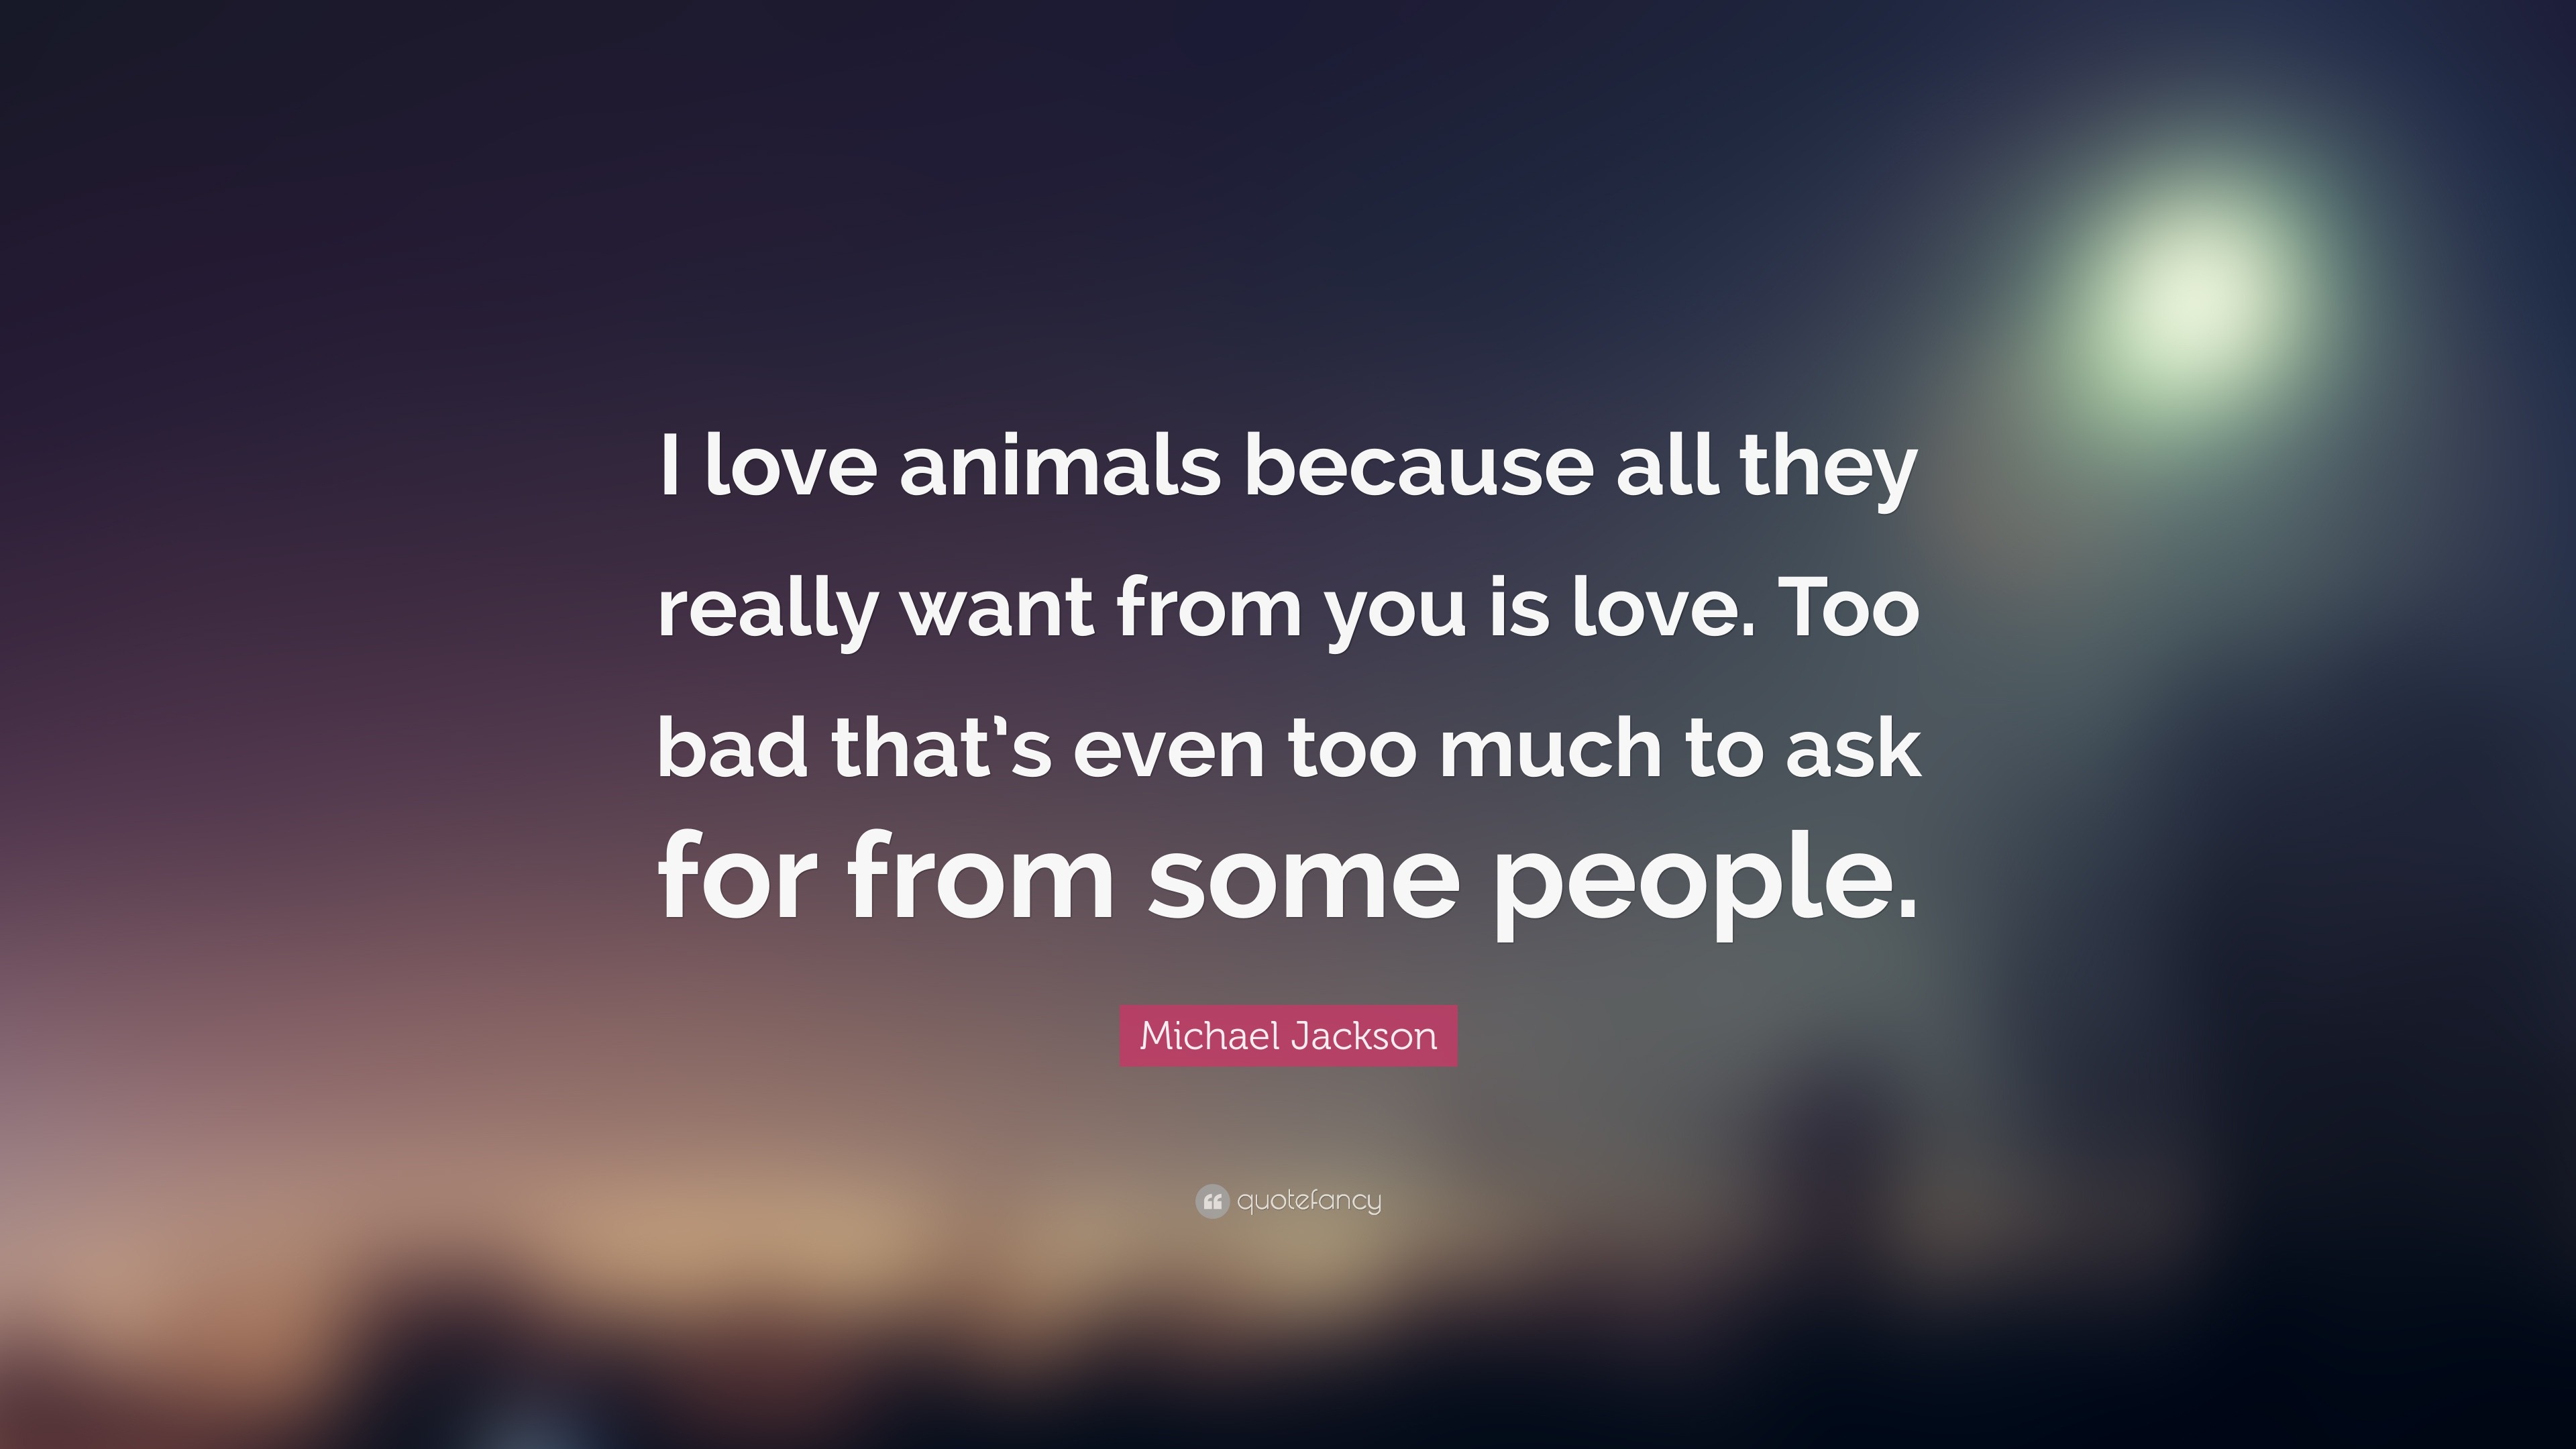 Michael Jackson Quote: “I love animals because all they really want from  you is love. Too